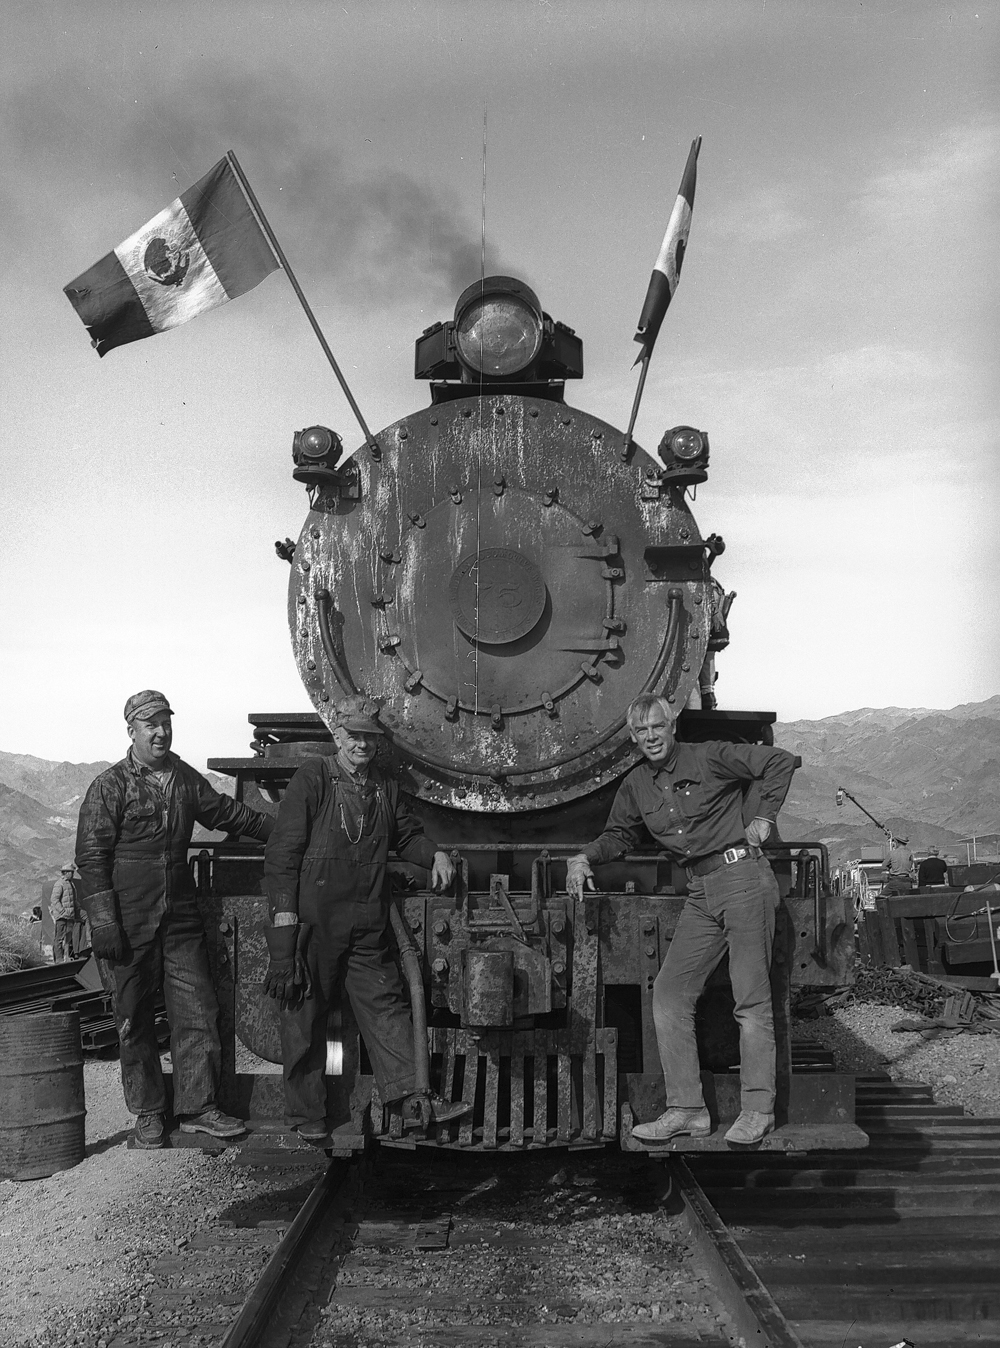 Men standing on the pilot of a steam locomotive.